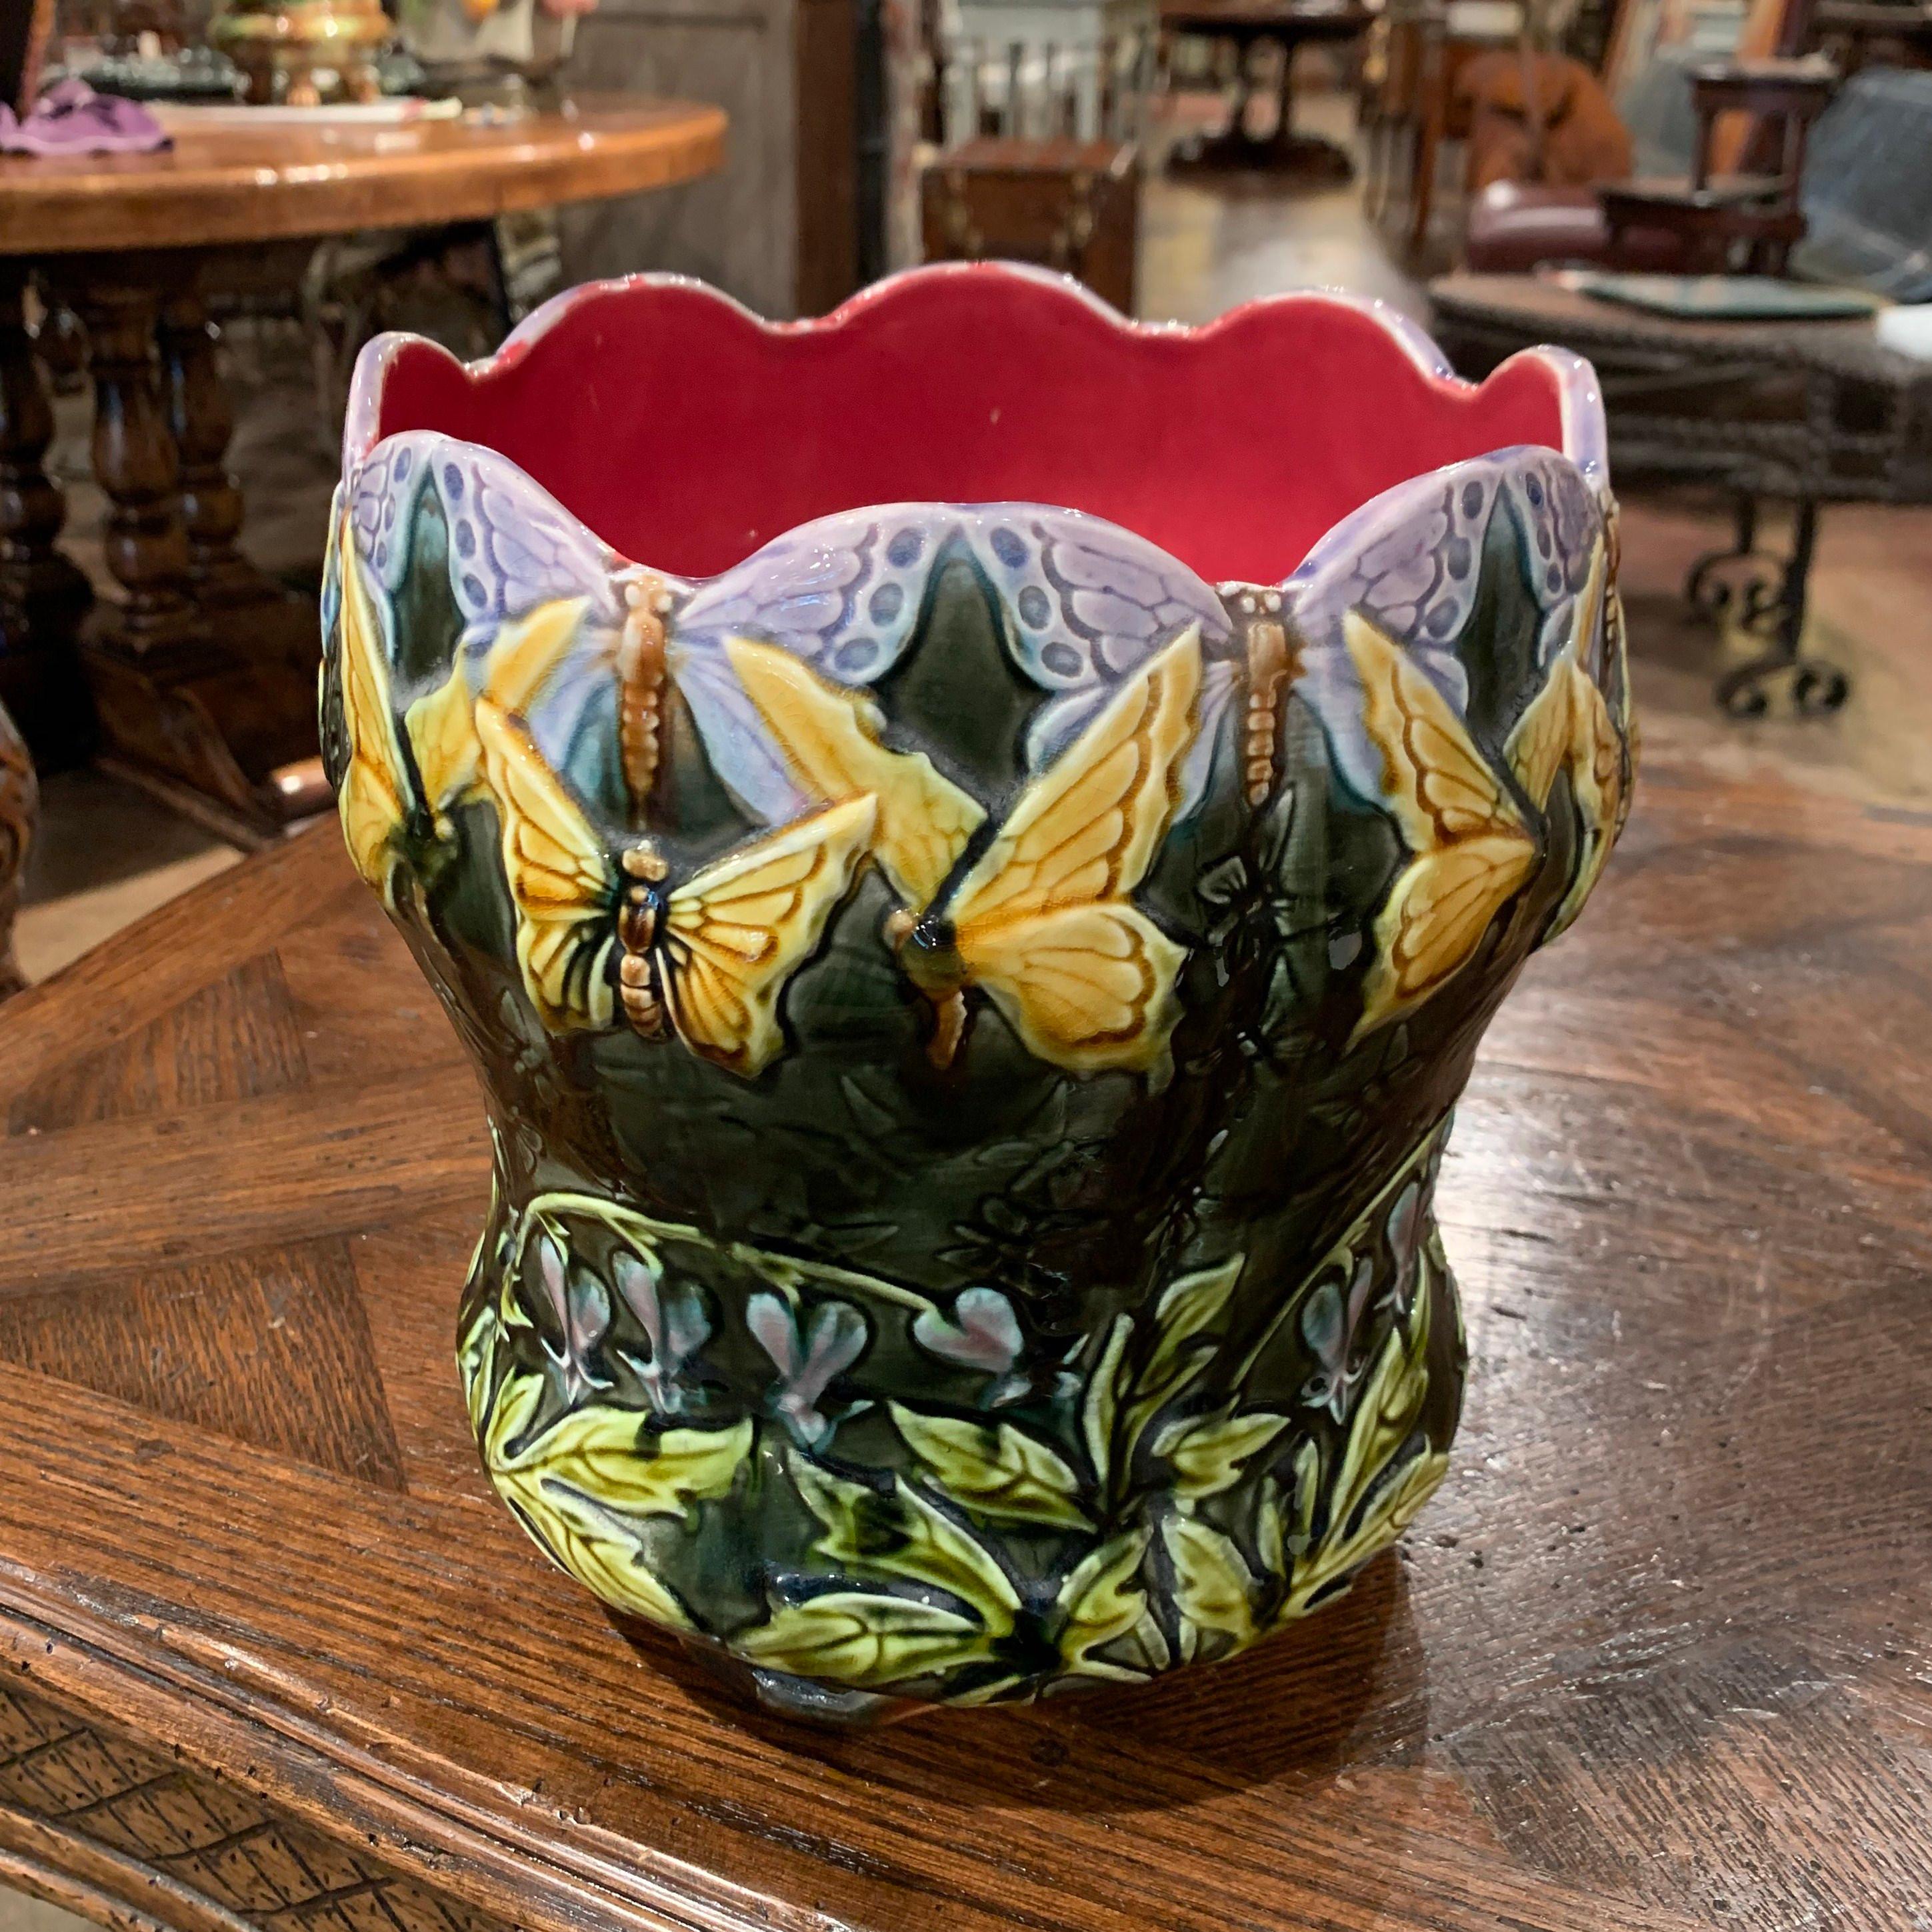 This colorful, hand painted Majolica planter was sculpted in Onnaing, France, circa 1870. Round in shape and standing on small feet, the antique cachepot embellished with scalloped edge features exquisite rendered butterfly and leaf motifs